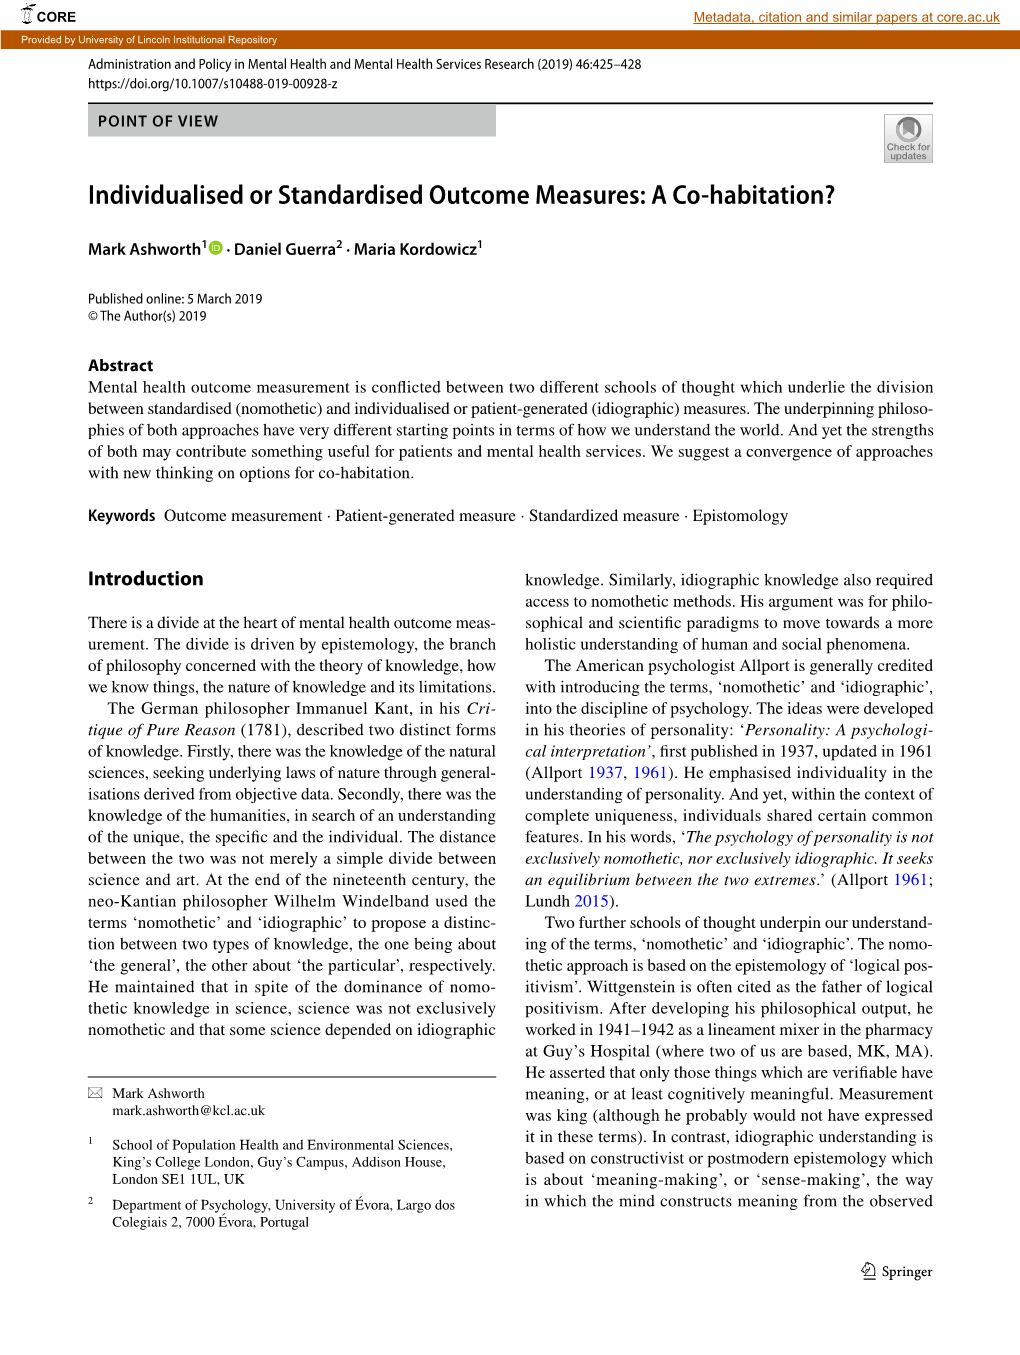 Individualised Or Standardised Outcome Measures: a Co-Habitation?